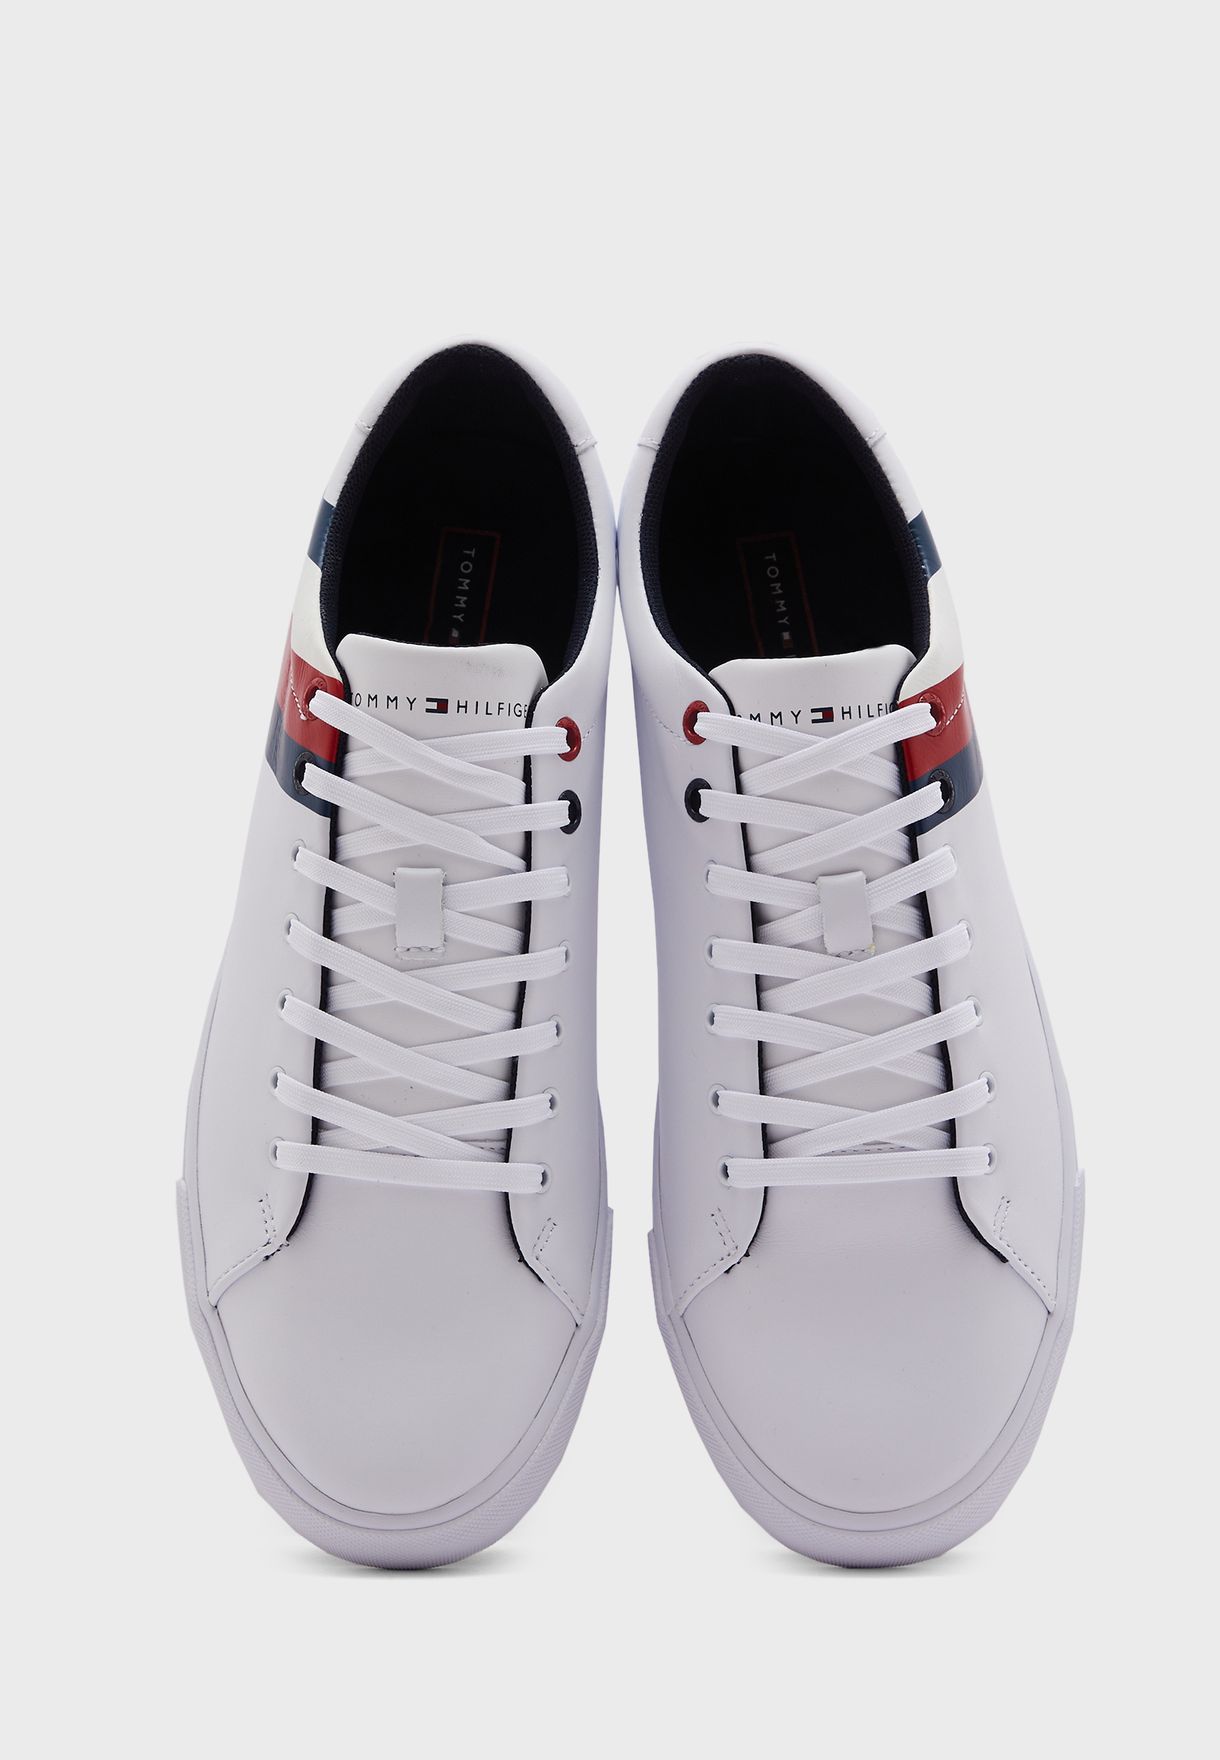 Corporate Stripes Low Top Sneakers